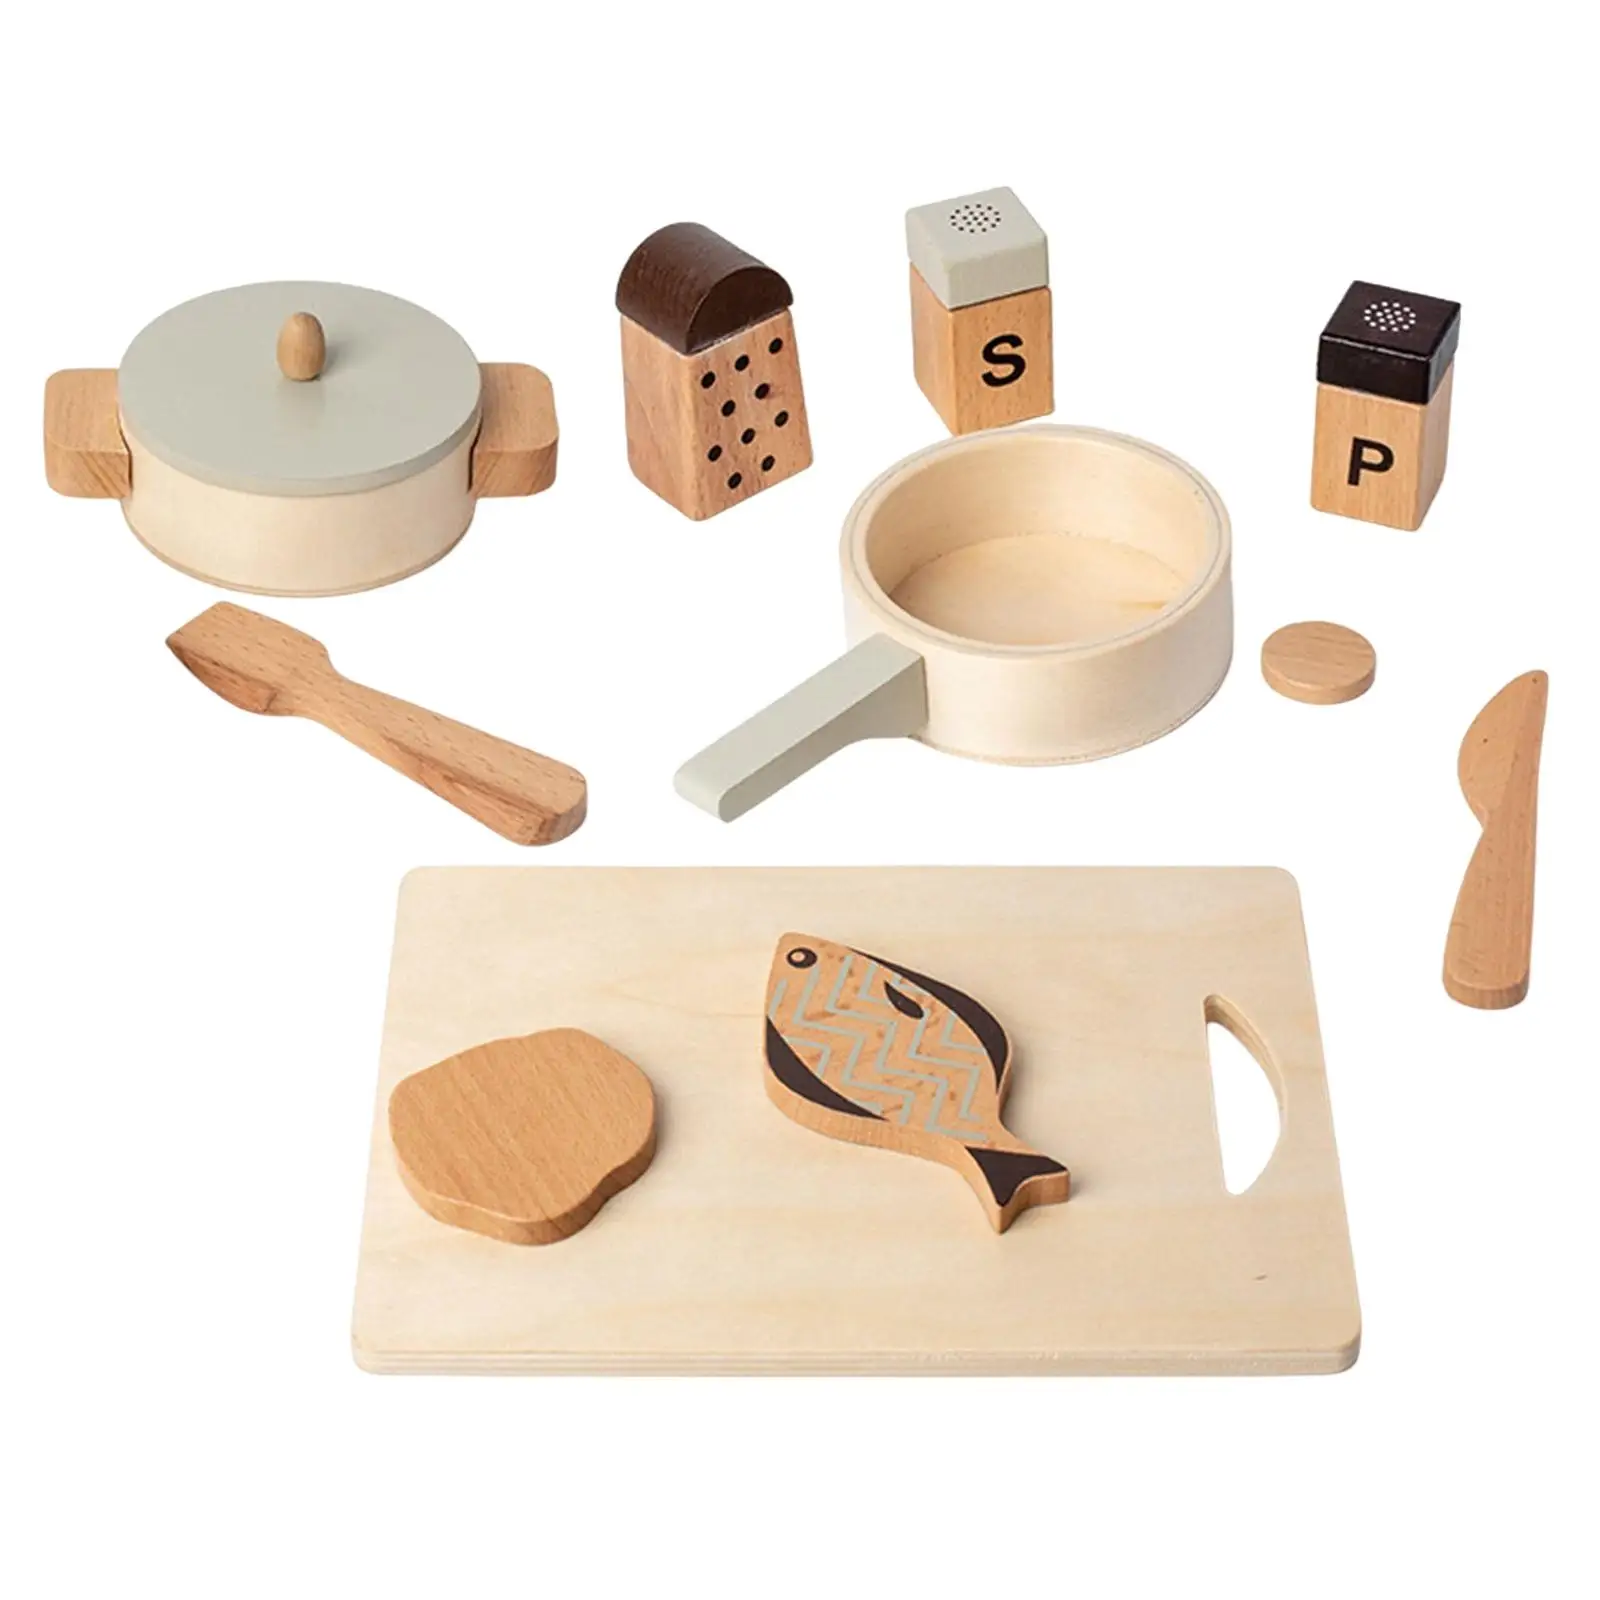 Wooden Kitchen Playset Pretend Toy Set Chopping Board for Girls Boys